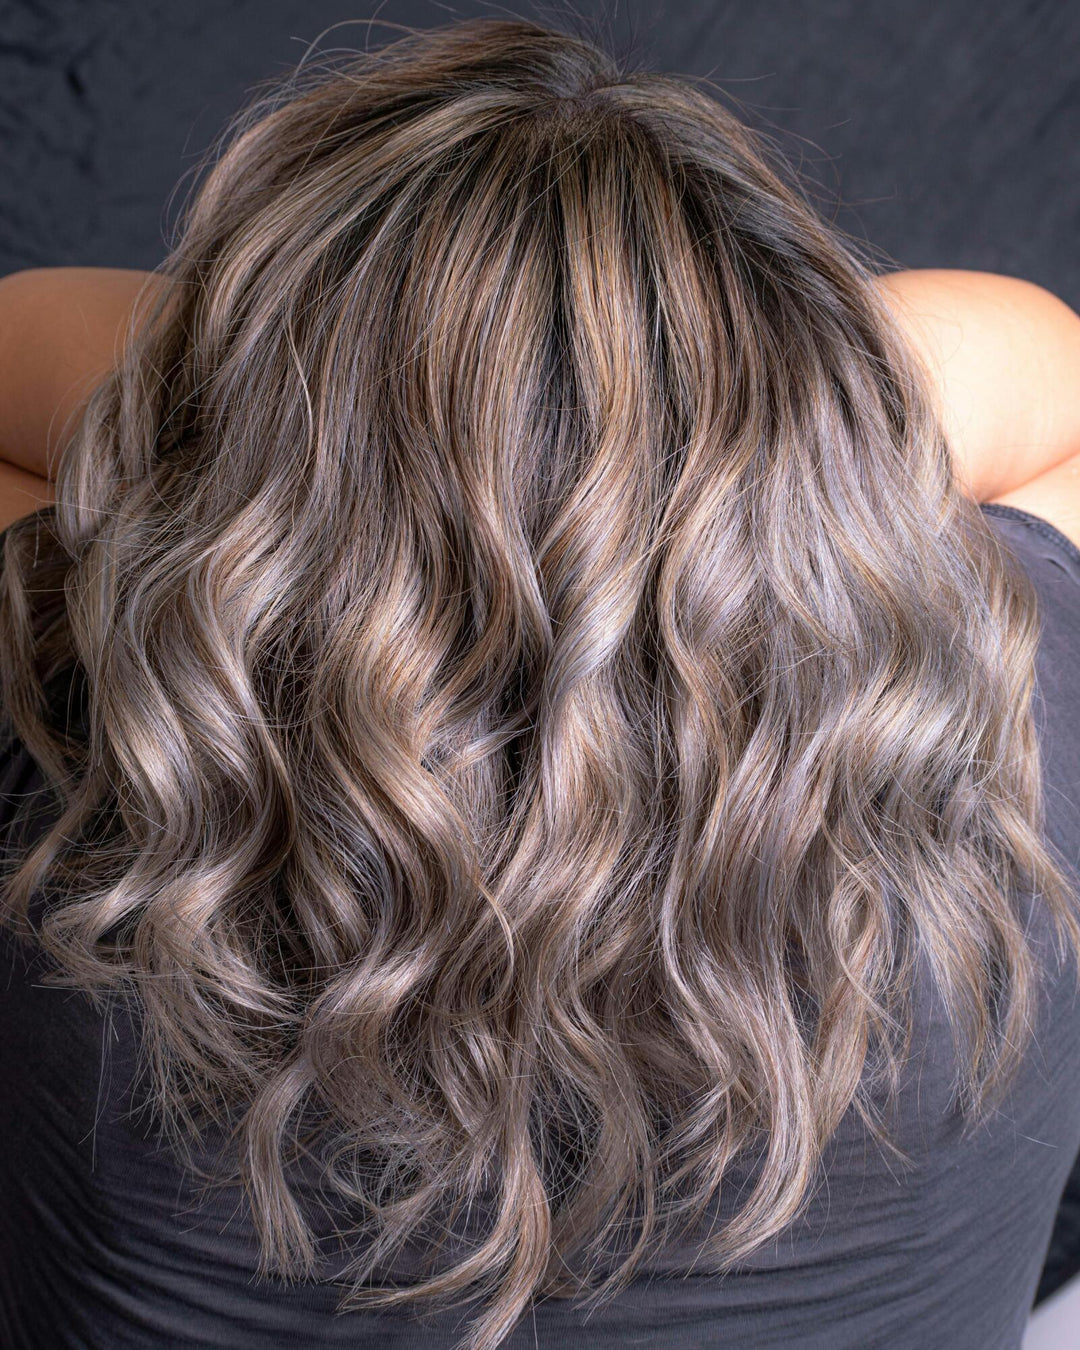 How to Achieve Voluminous Wavy Hair: Tips and Tricks From the Pros